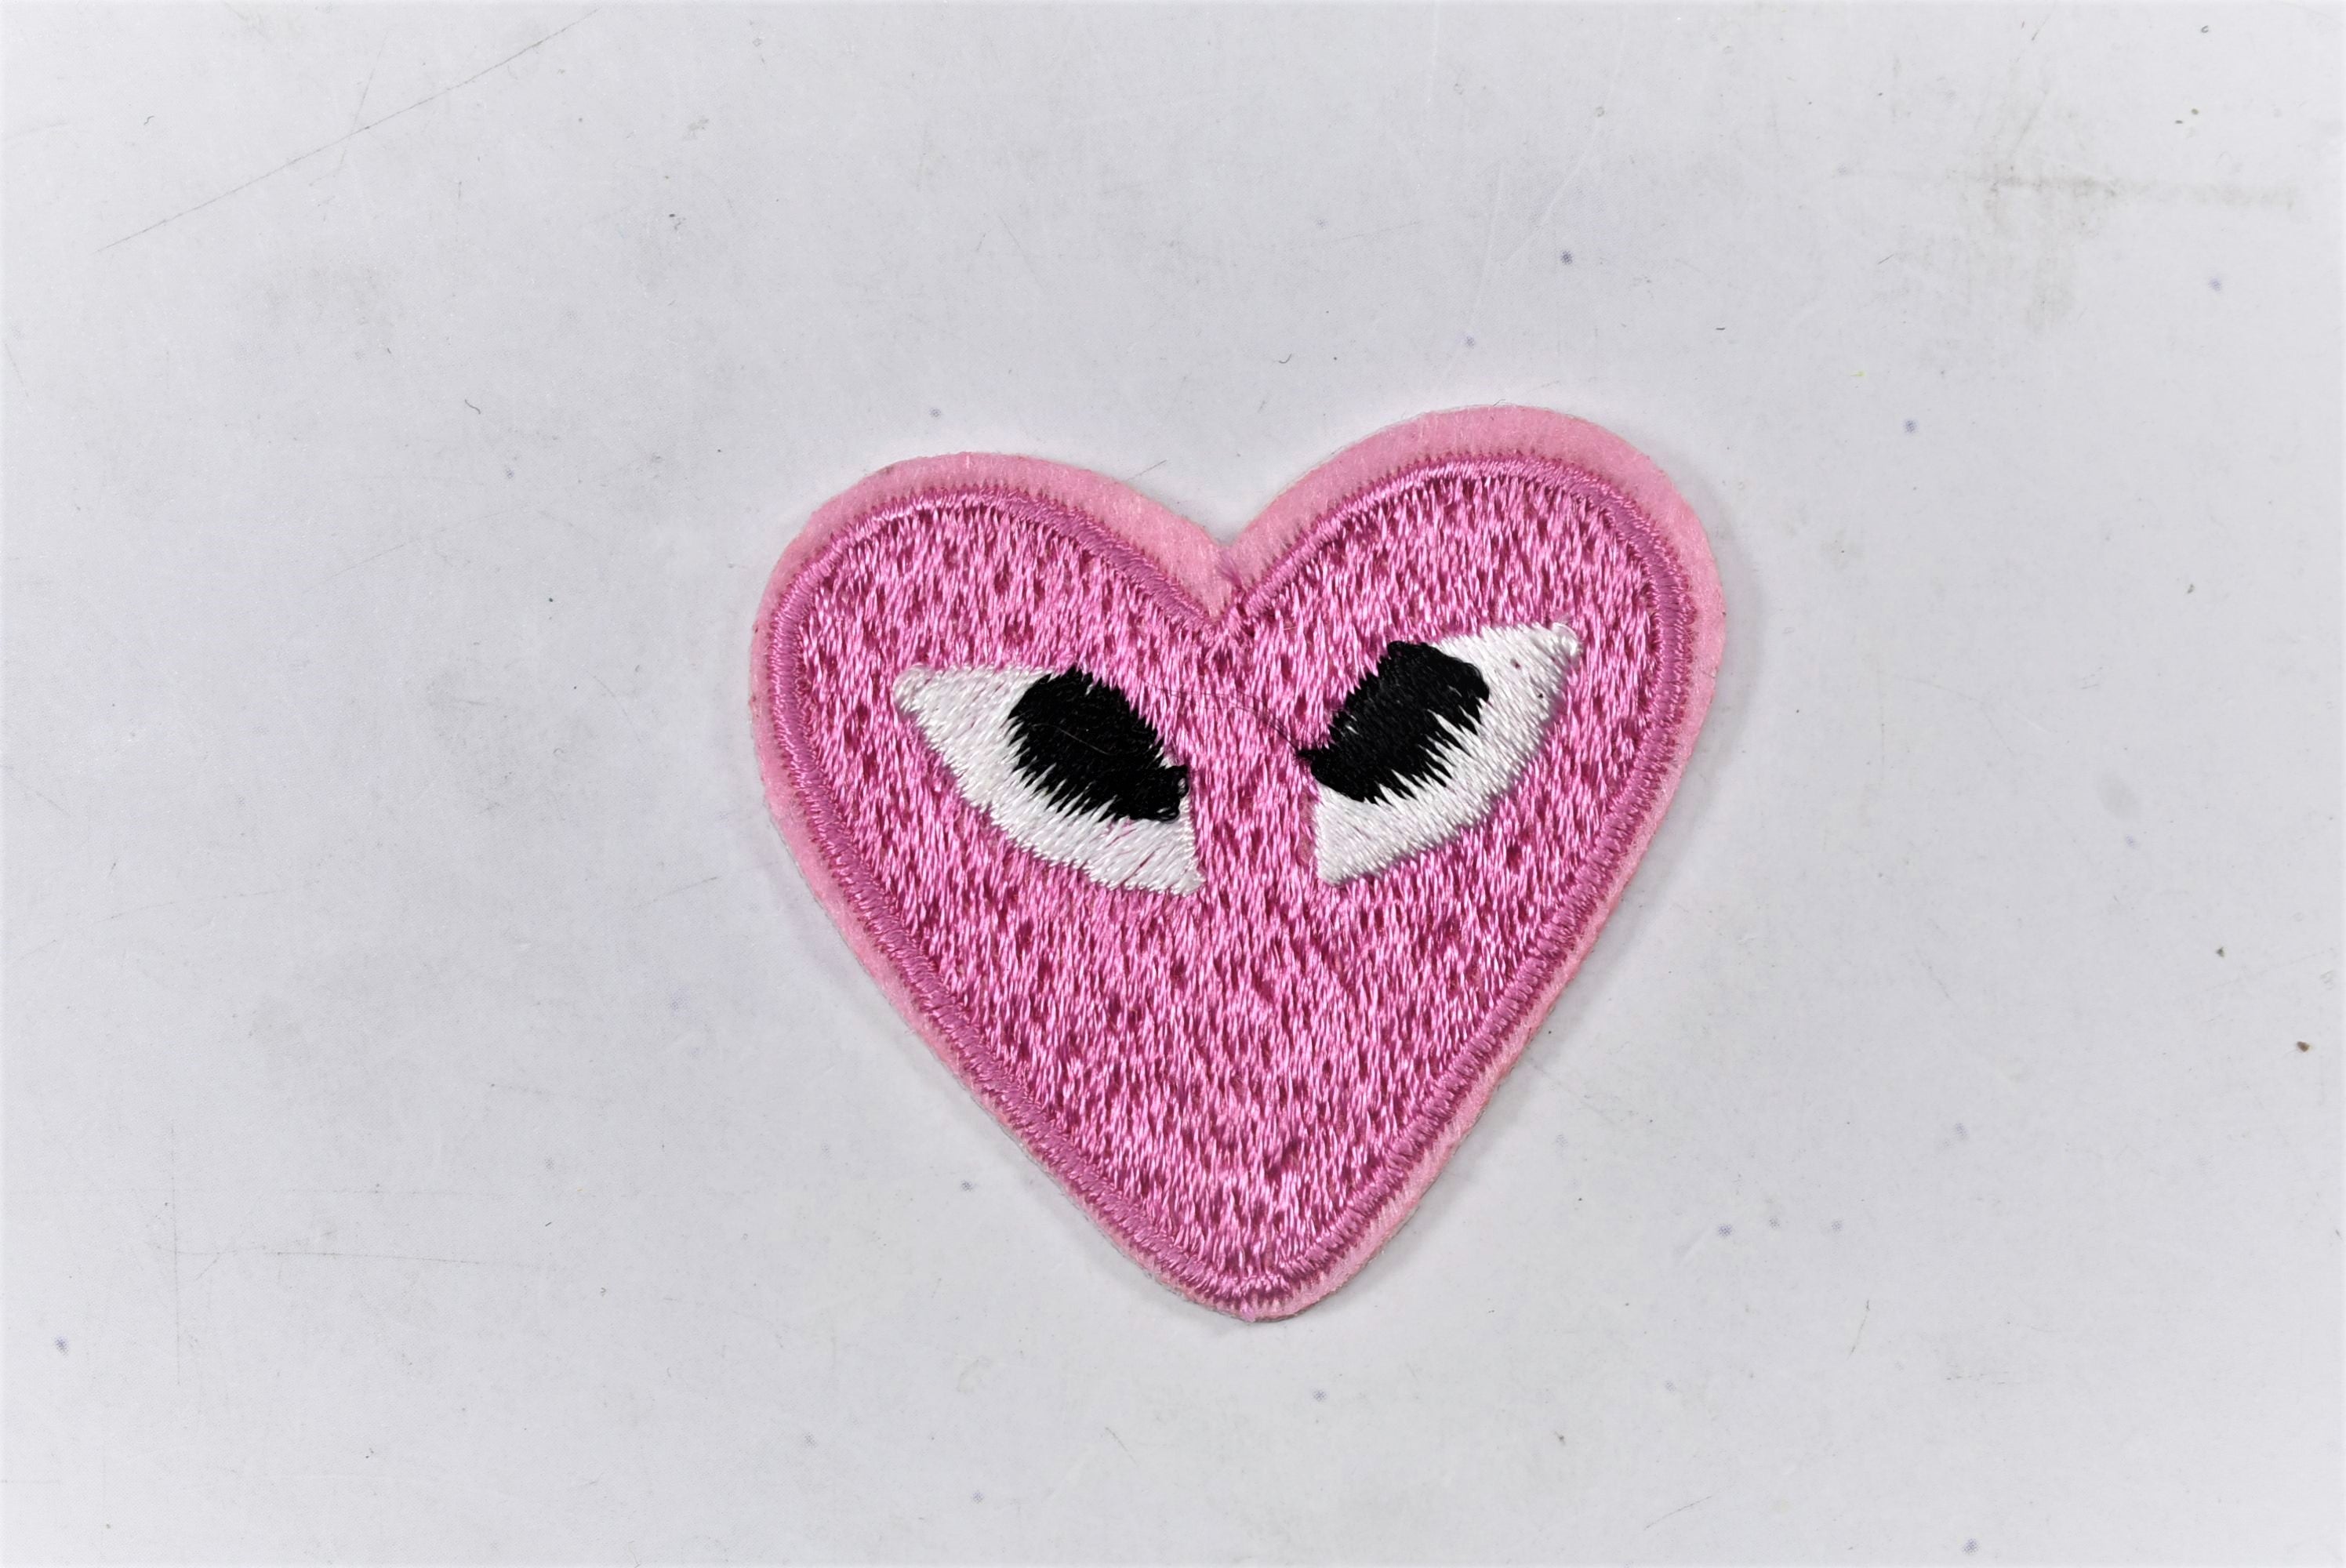 Heart Patch